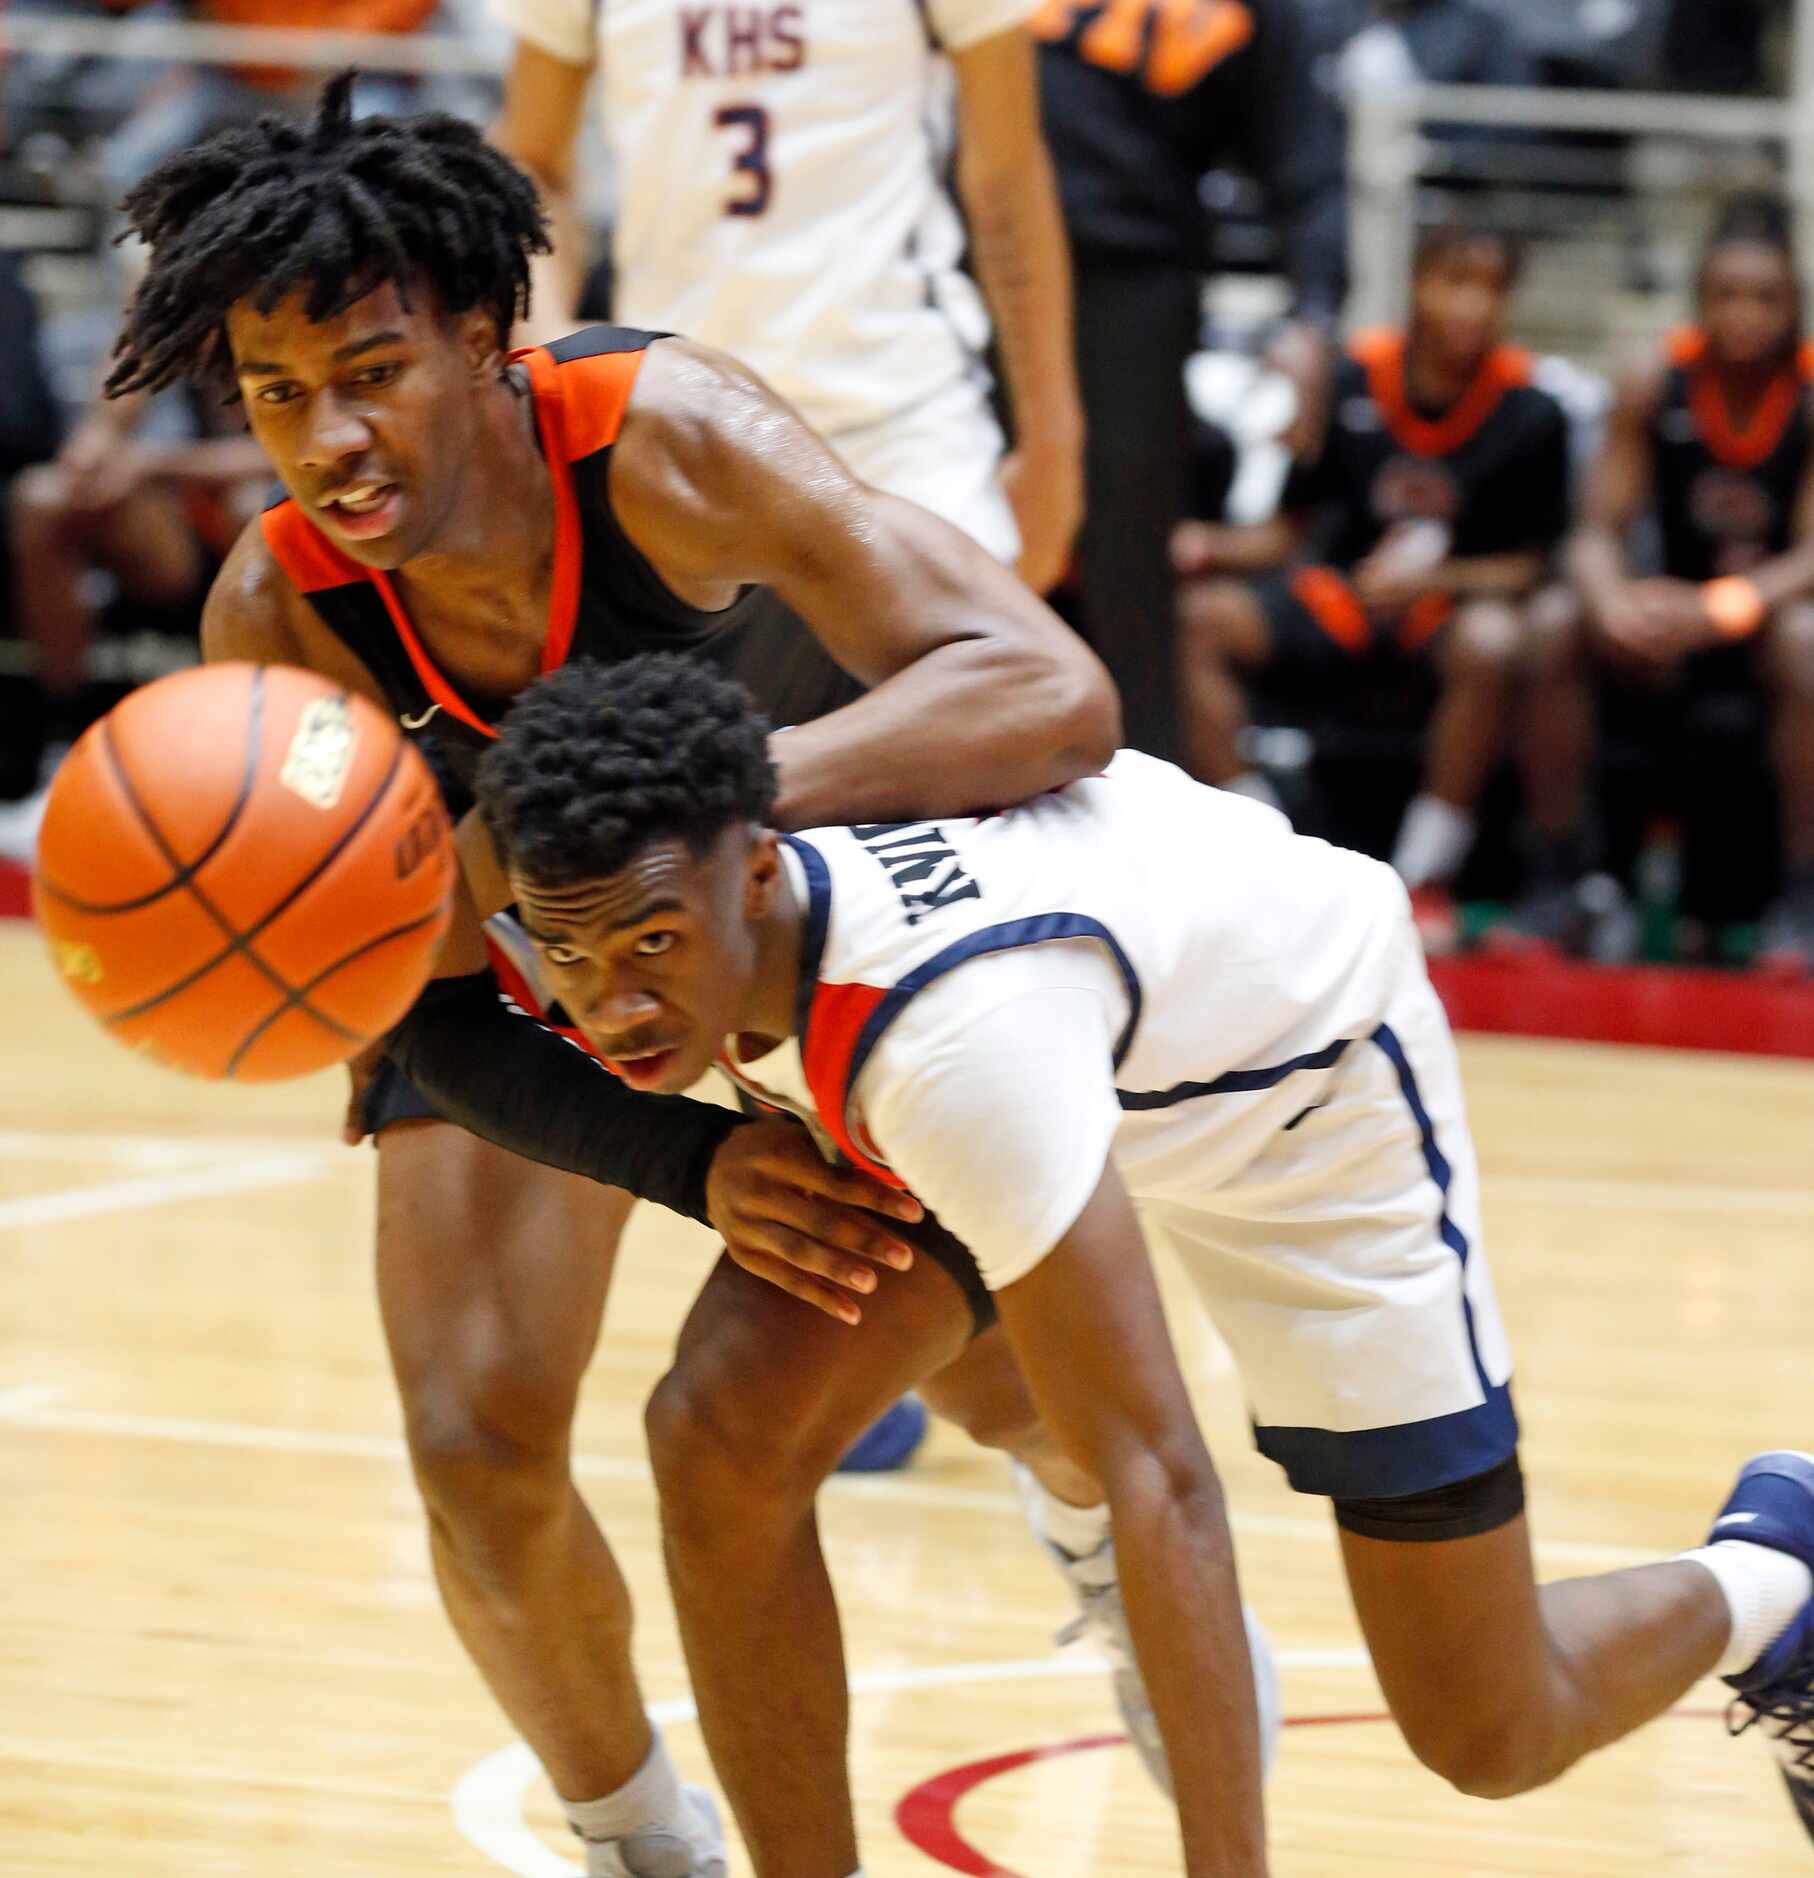 Lancaster High's Dillon Battie (4) and Kimball High’s T’Johnn Brown (2) vie for a loose ball...